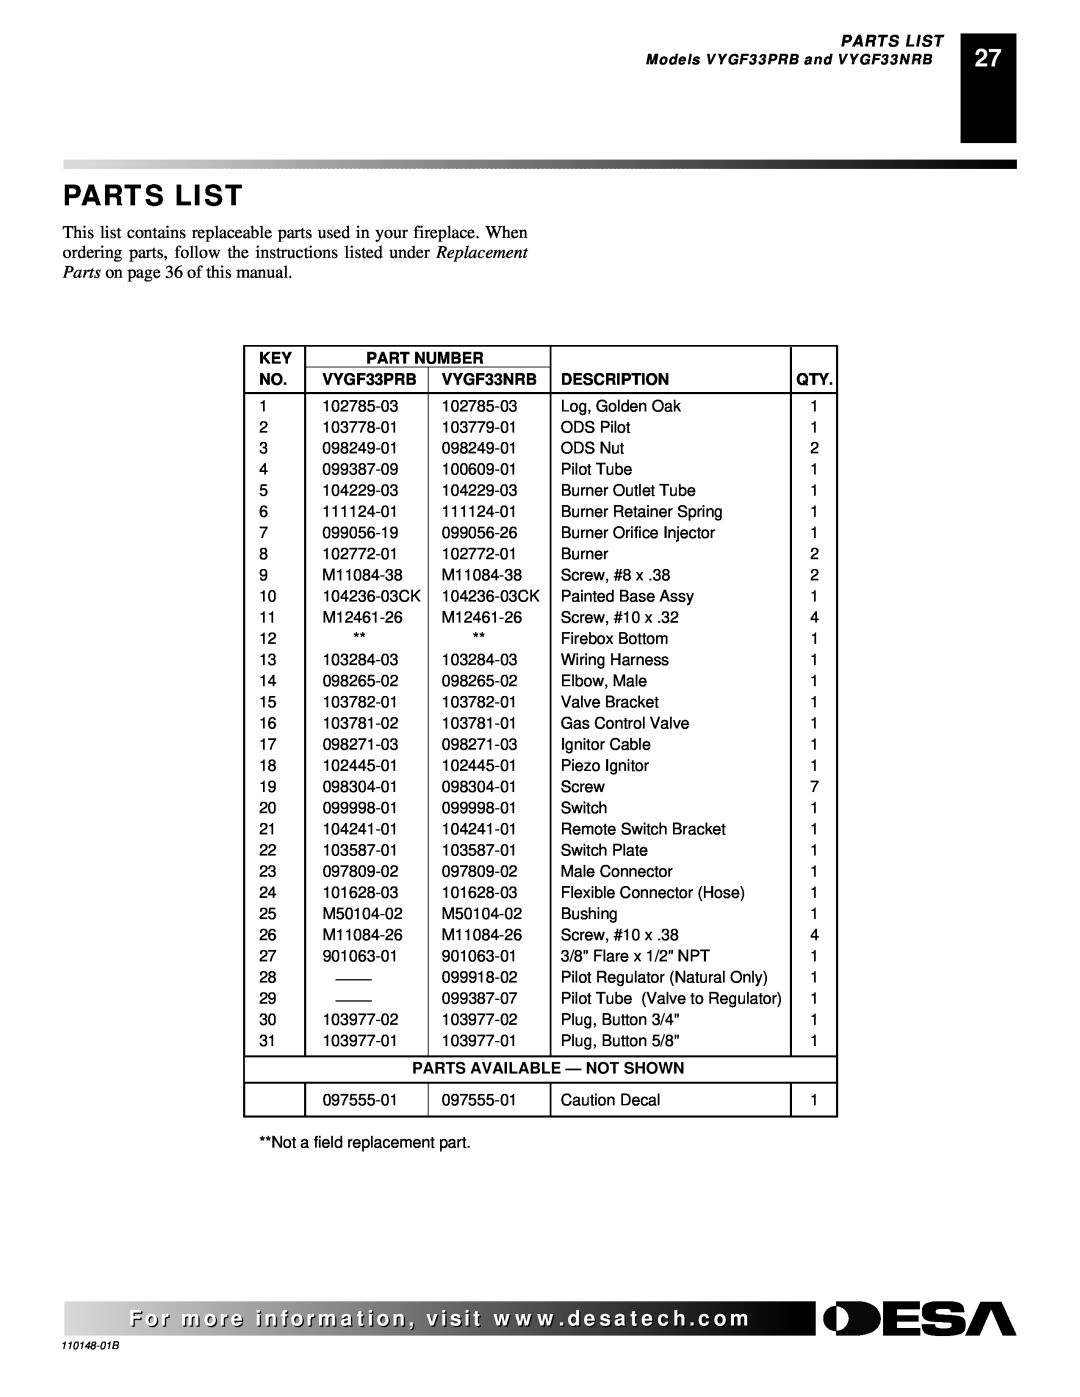 Desa FPVF33NRA installation manual Parts List, Part Number, VYGF33PRB, VYGF33NRB, Description, Parts Available - Not Shown 